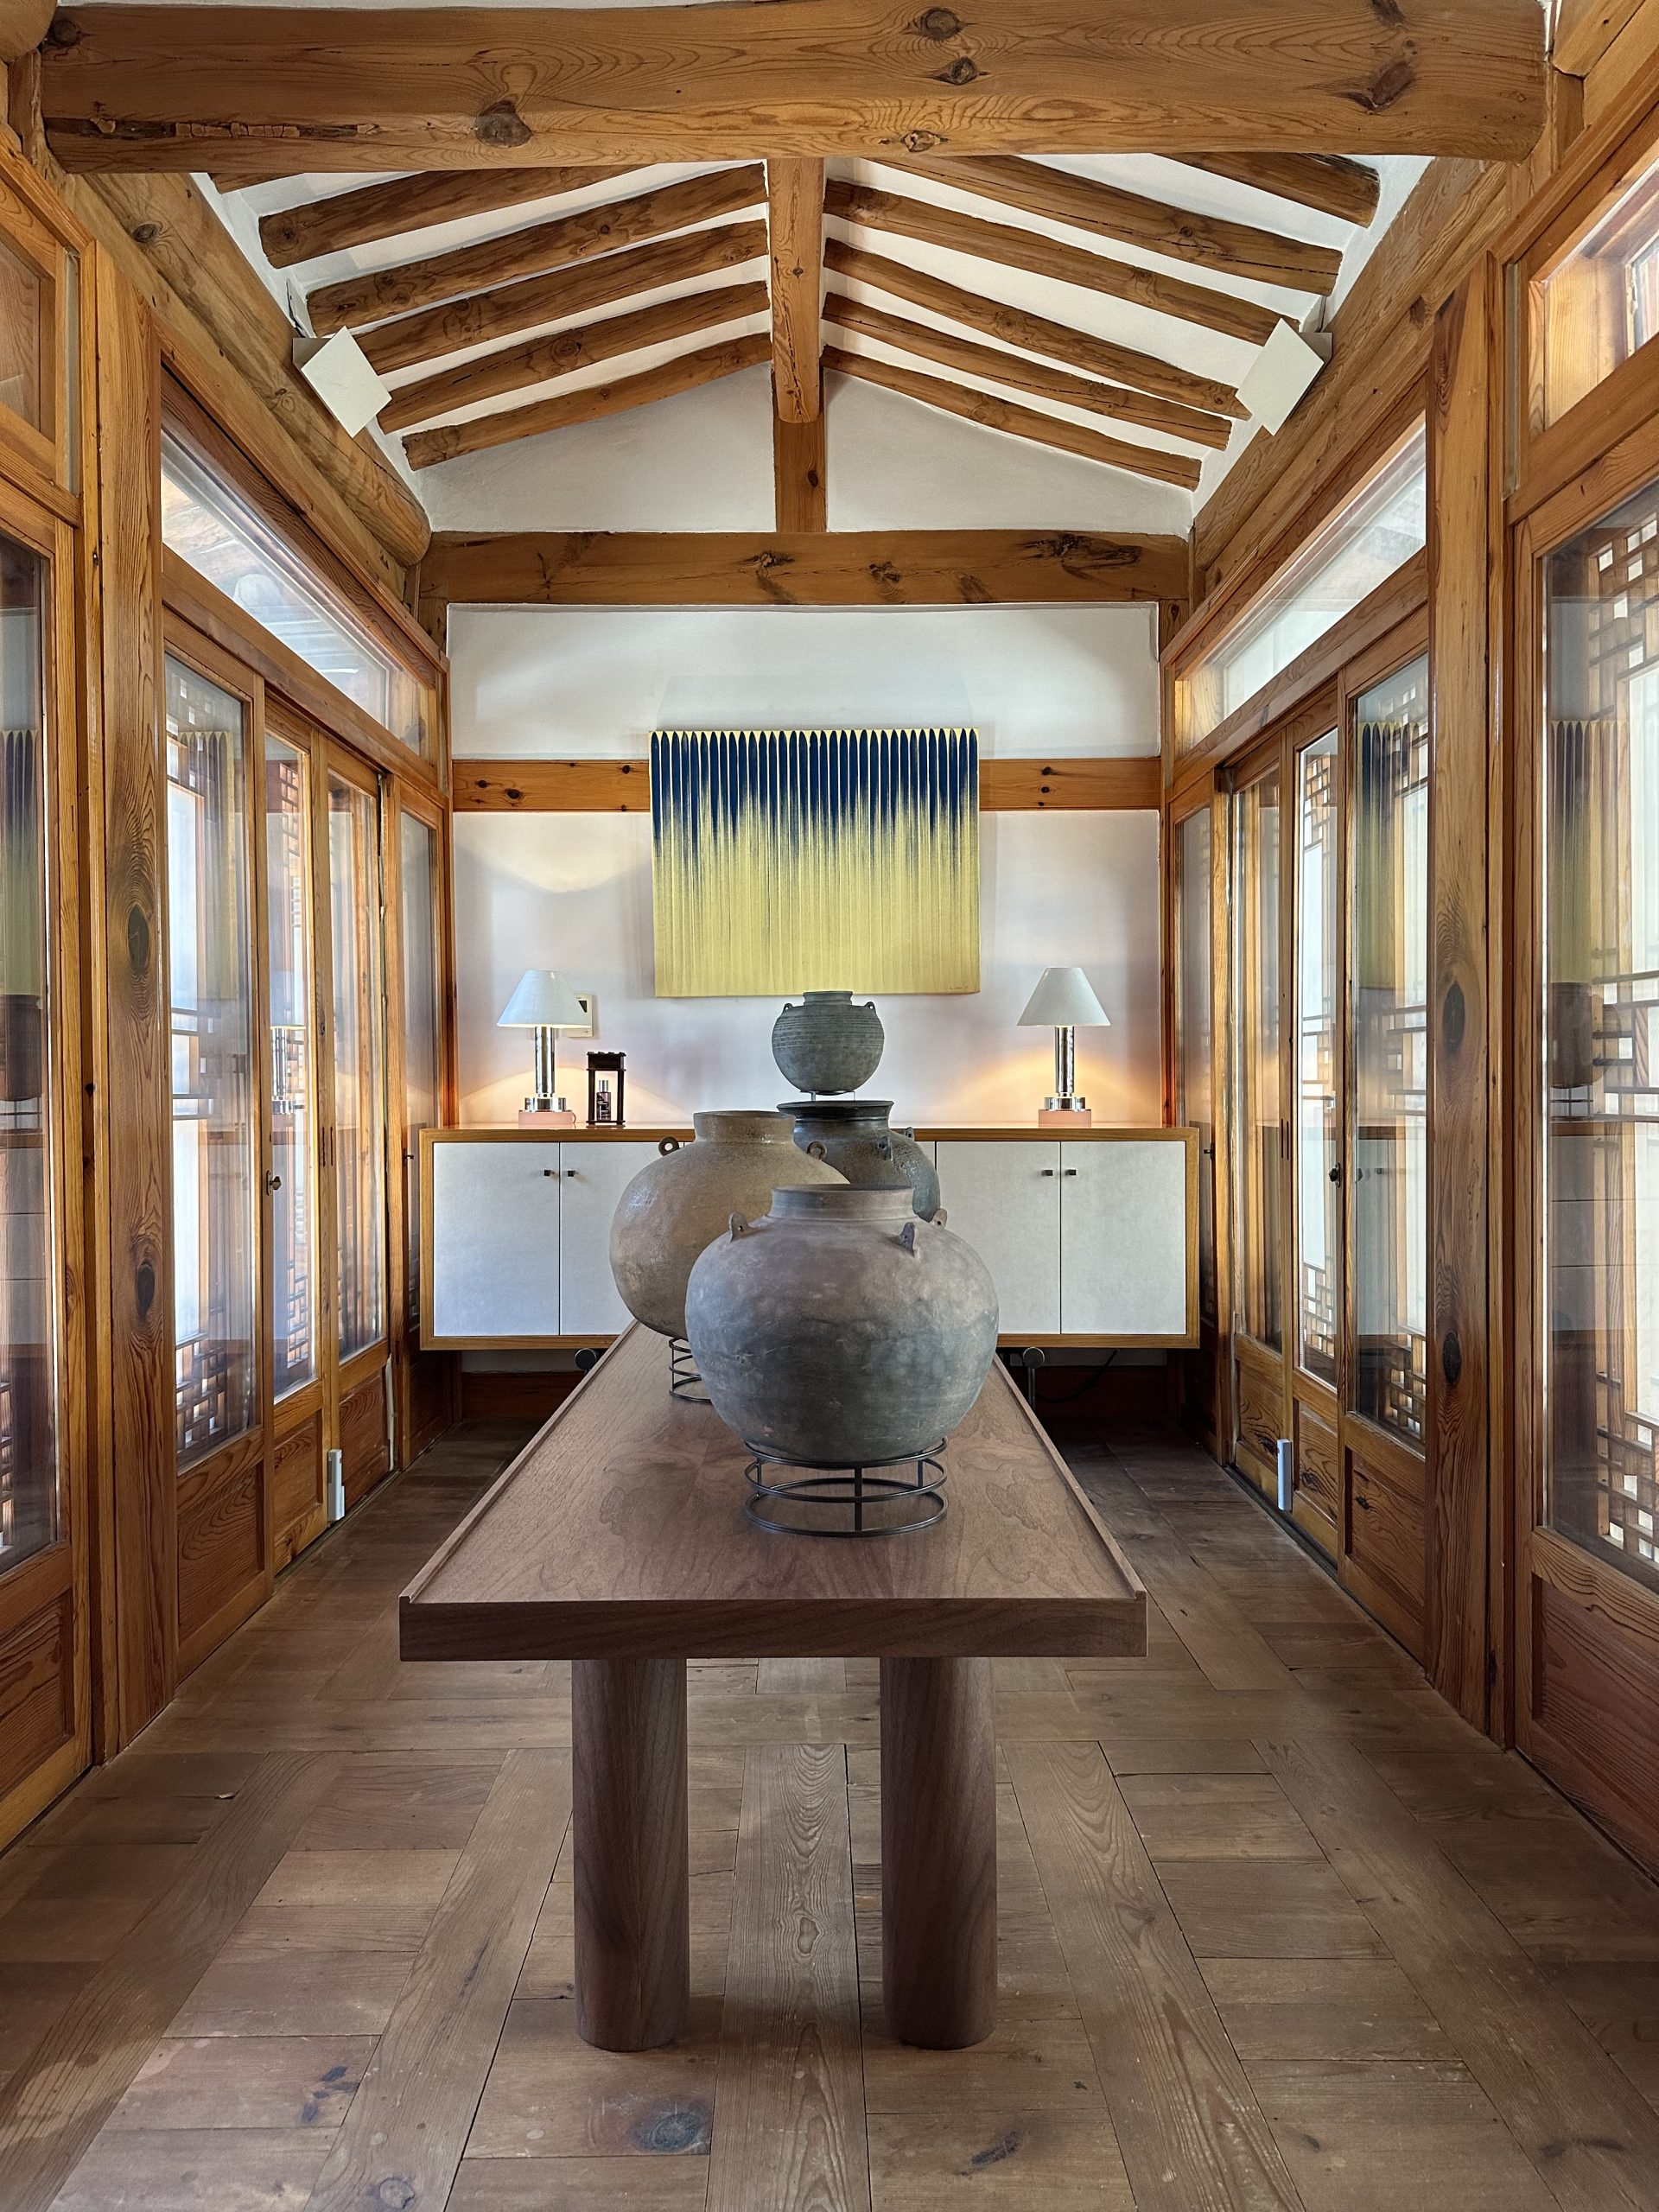 Curator Lawrence Van Hagen’s “What’s Up / Seoul” Exhibit at Designer Teo Yang’s Private Residence